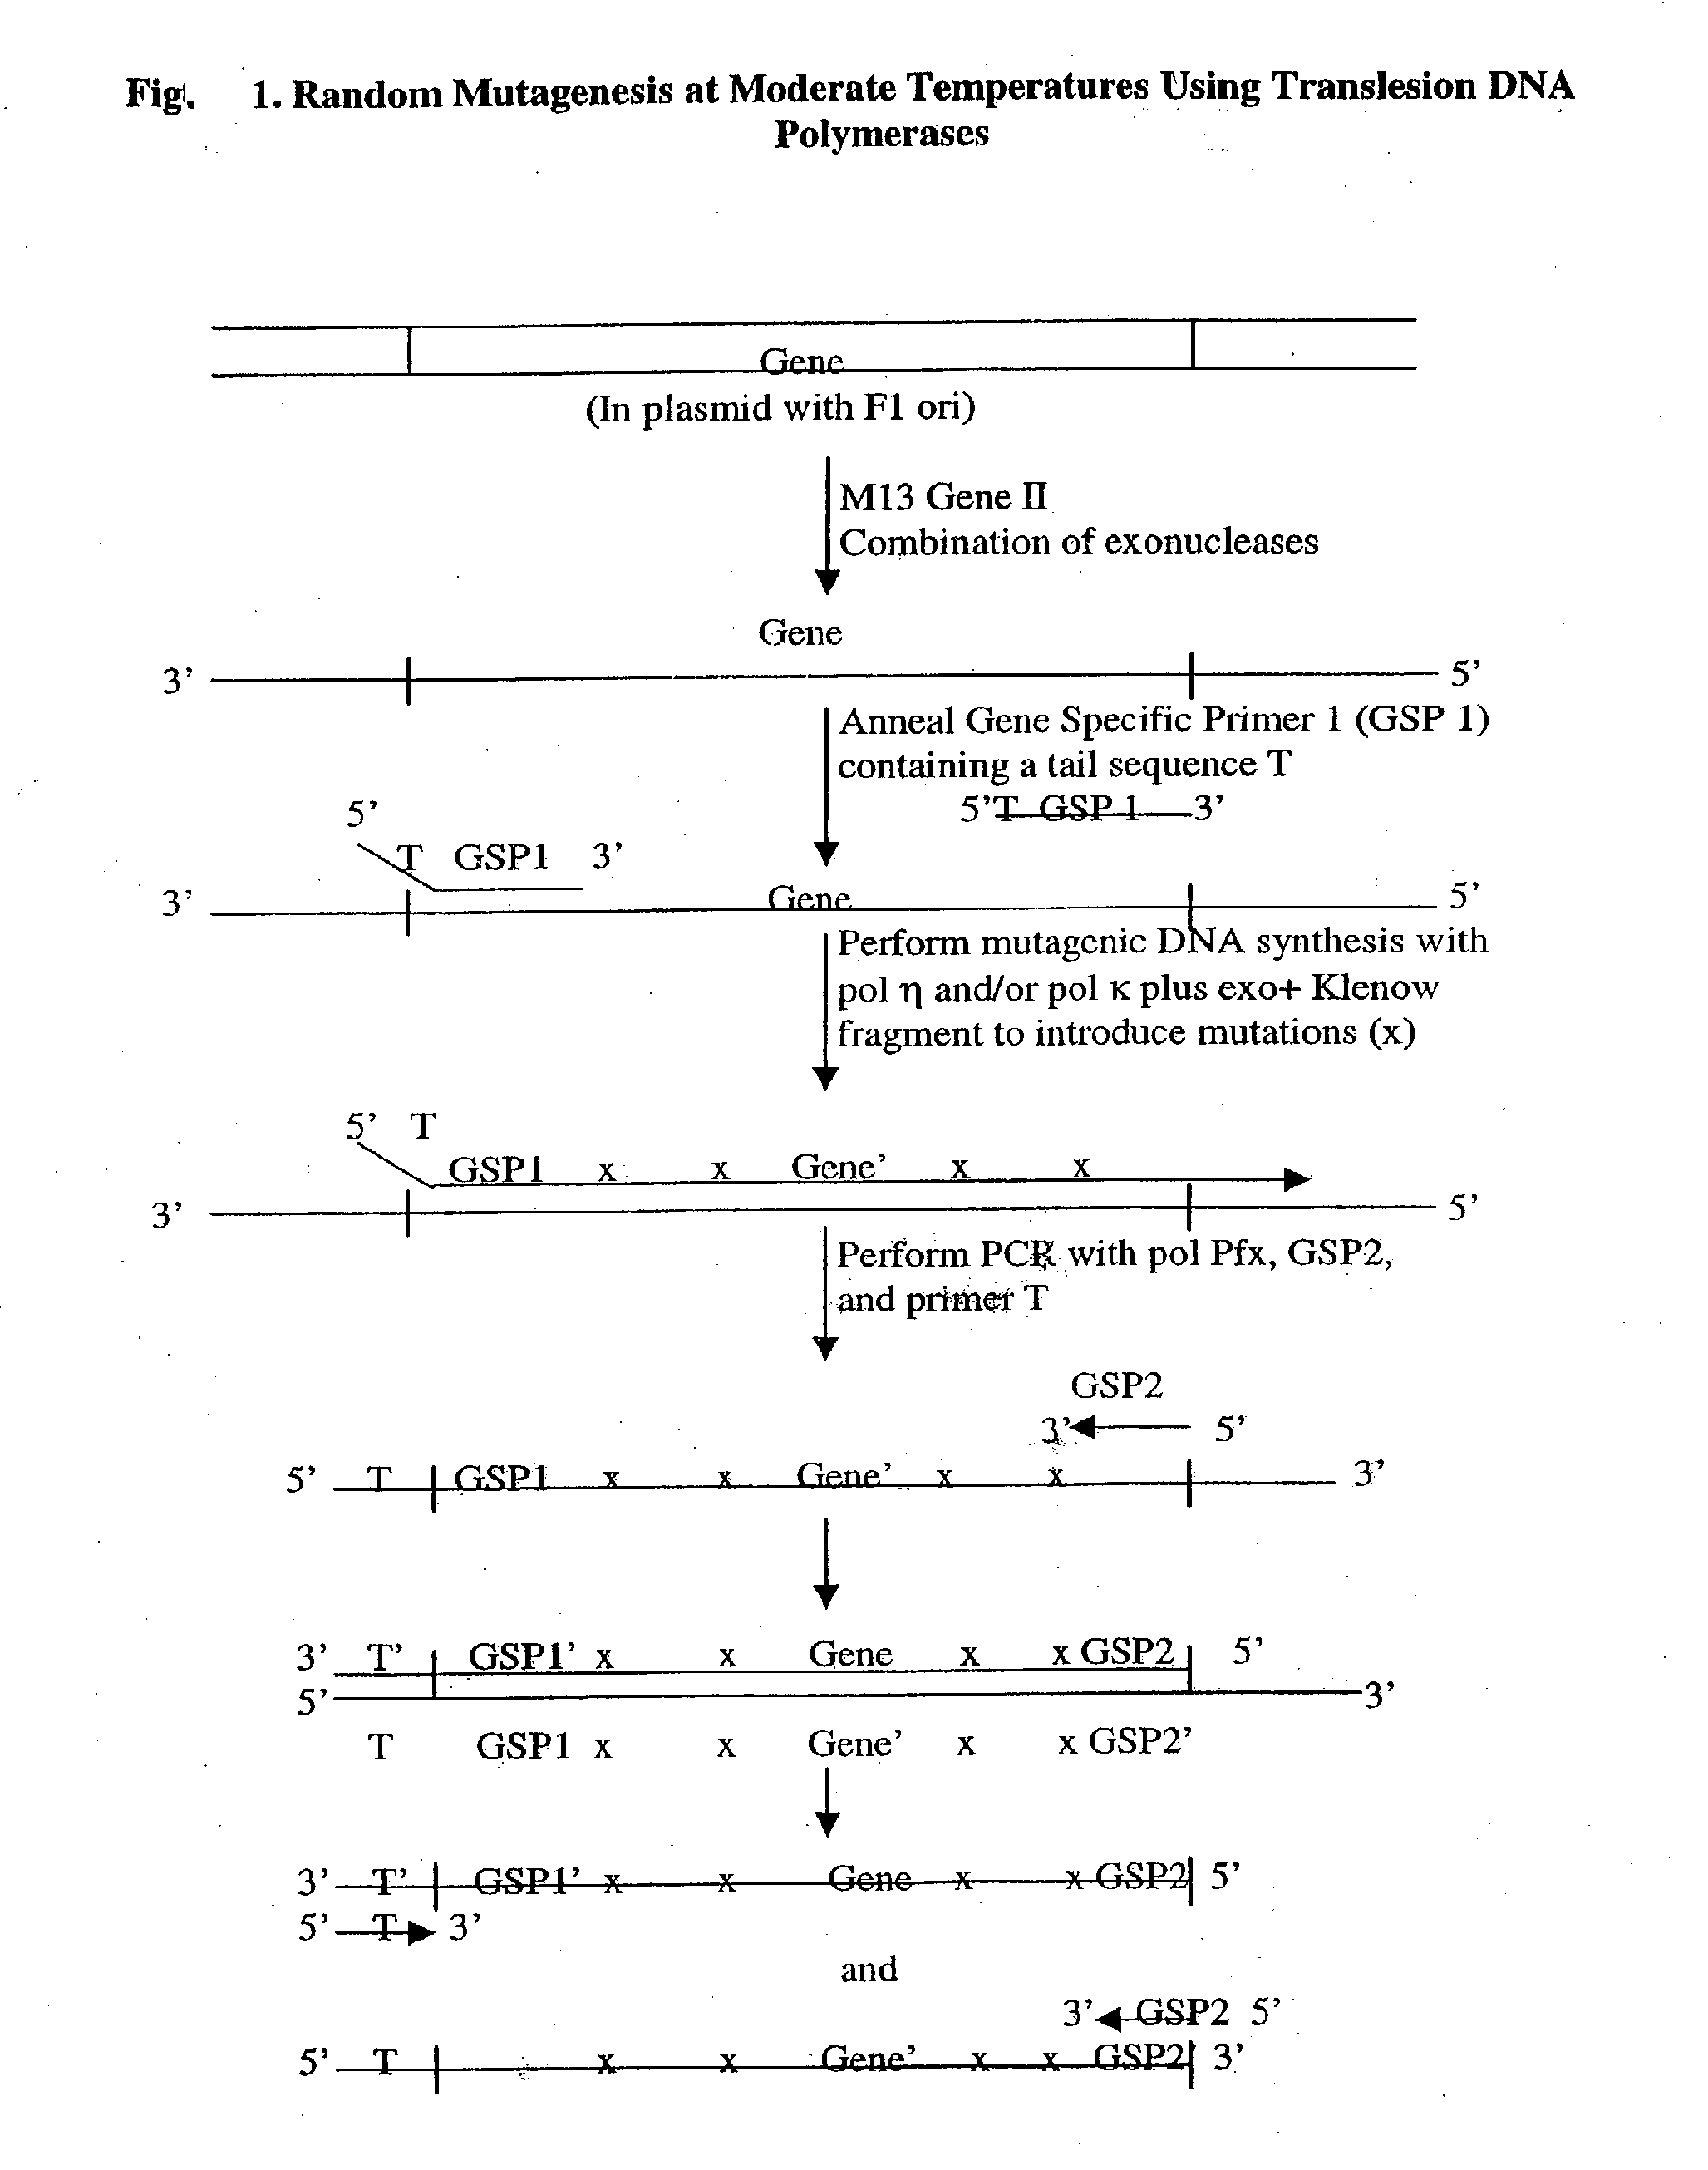 Methods of random mutagenesis and methods of modifying nucleic acids using translesion DNA polymerases